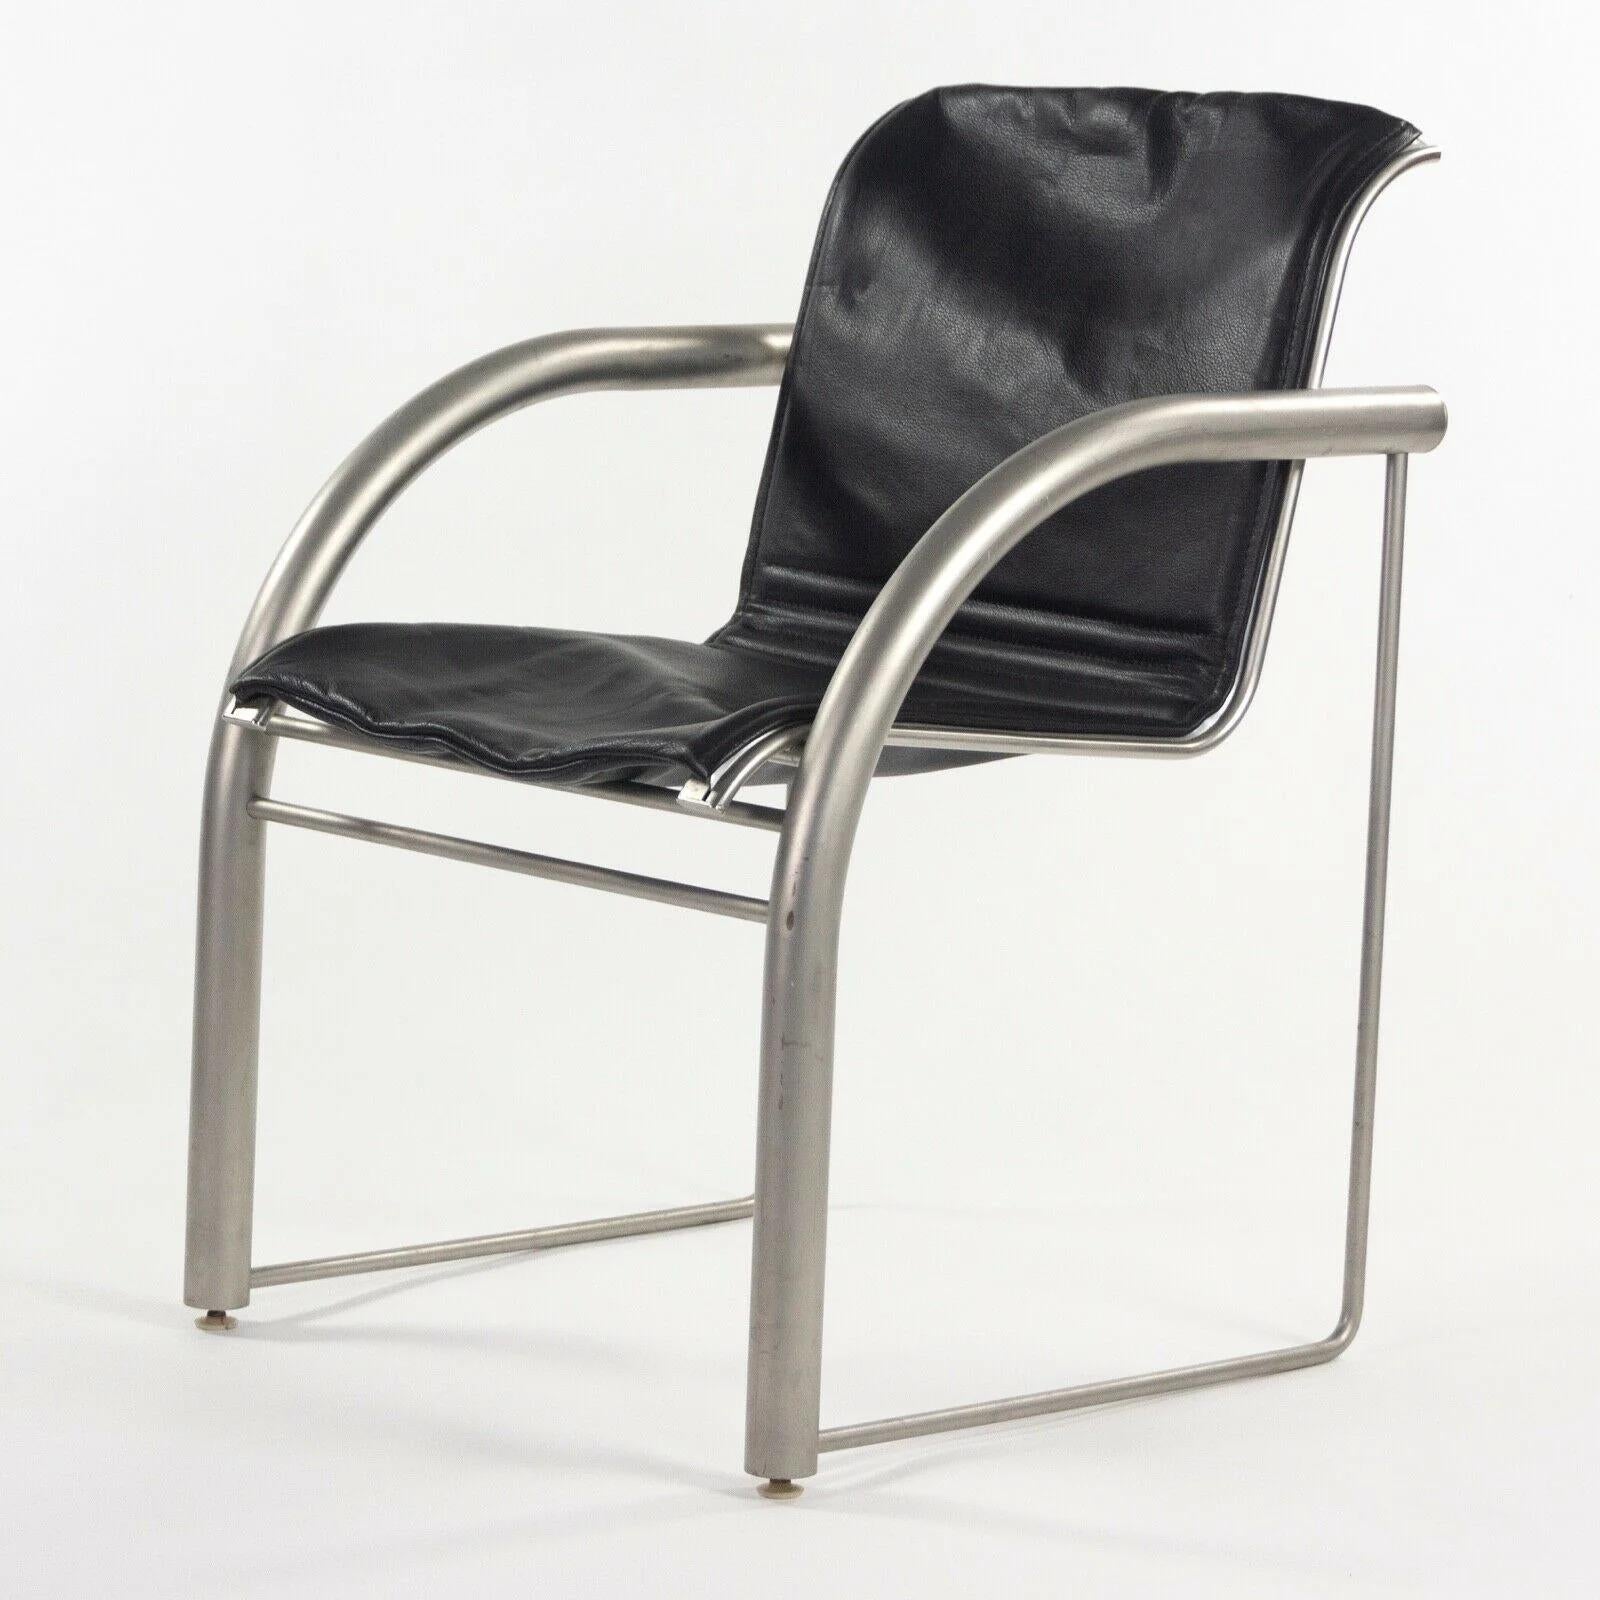 Prototype Richard Schultz 2002 Collection Stainless & Leather Dining Chair For Sale 3